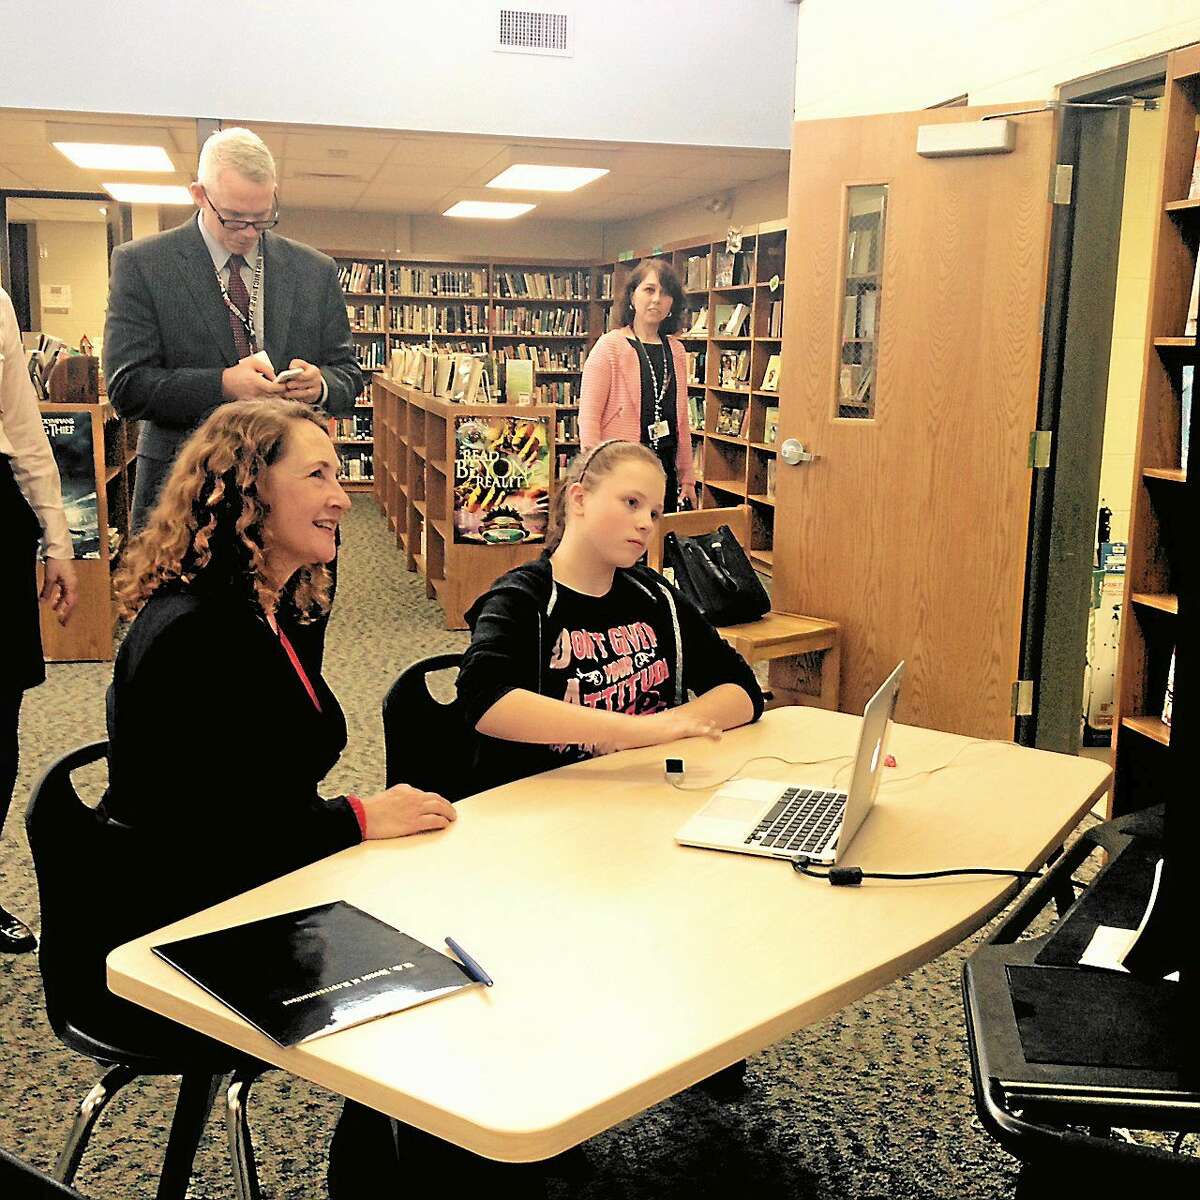 Congresswoman Elizabeth Esty toured Wamogo Regional High School’s Makerspace Wednesday to see how students at work in the innovative space.